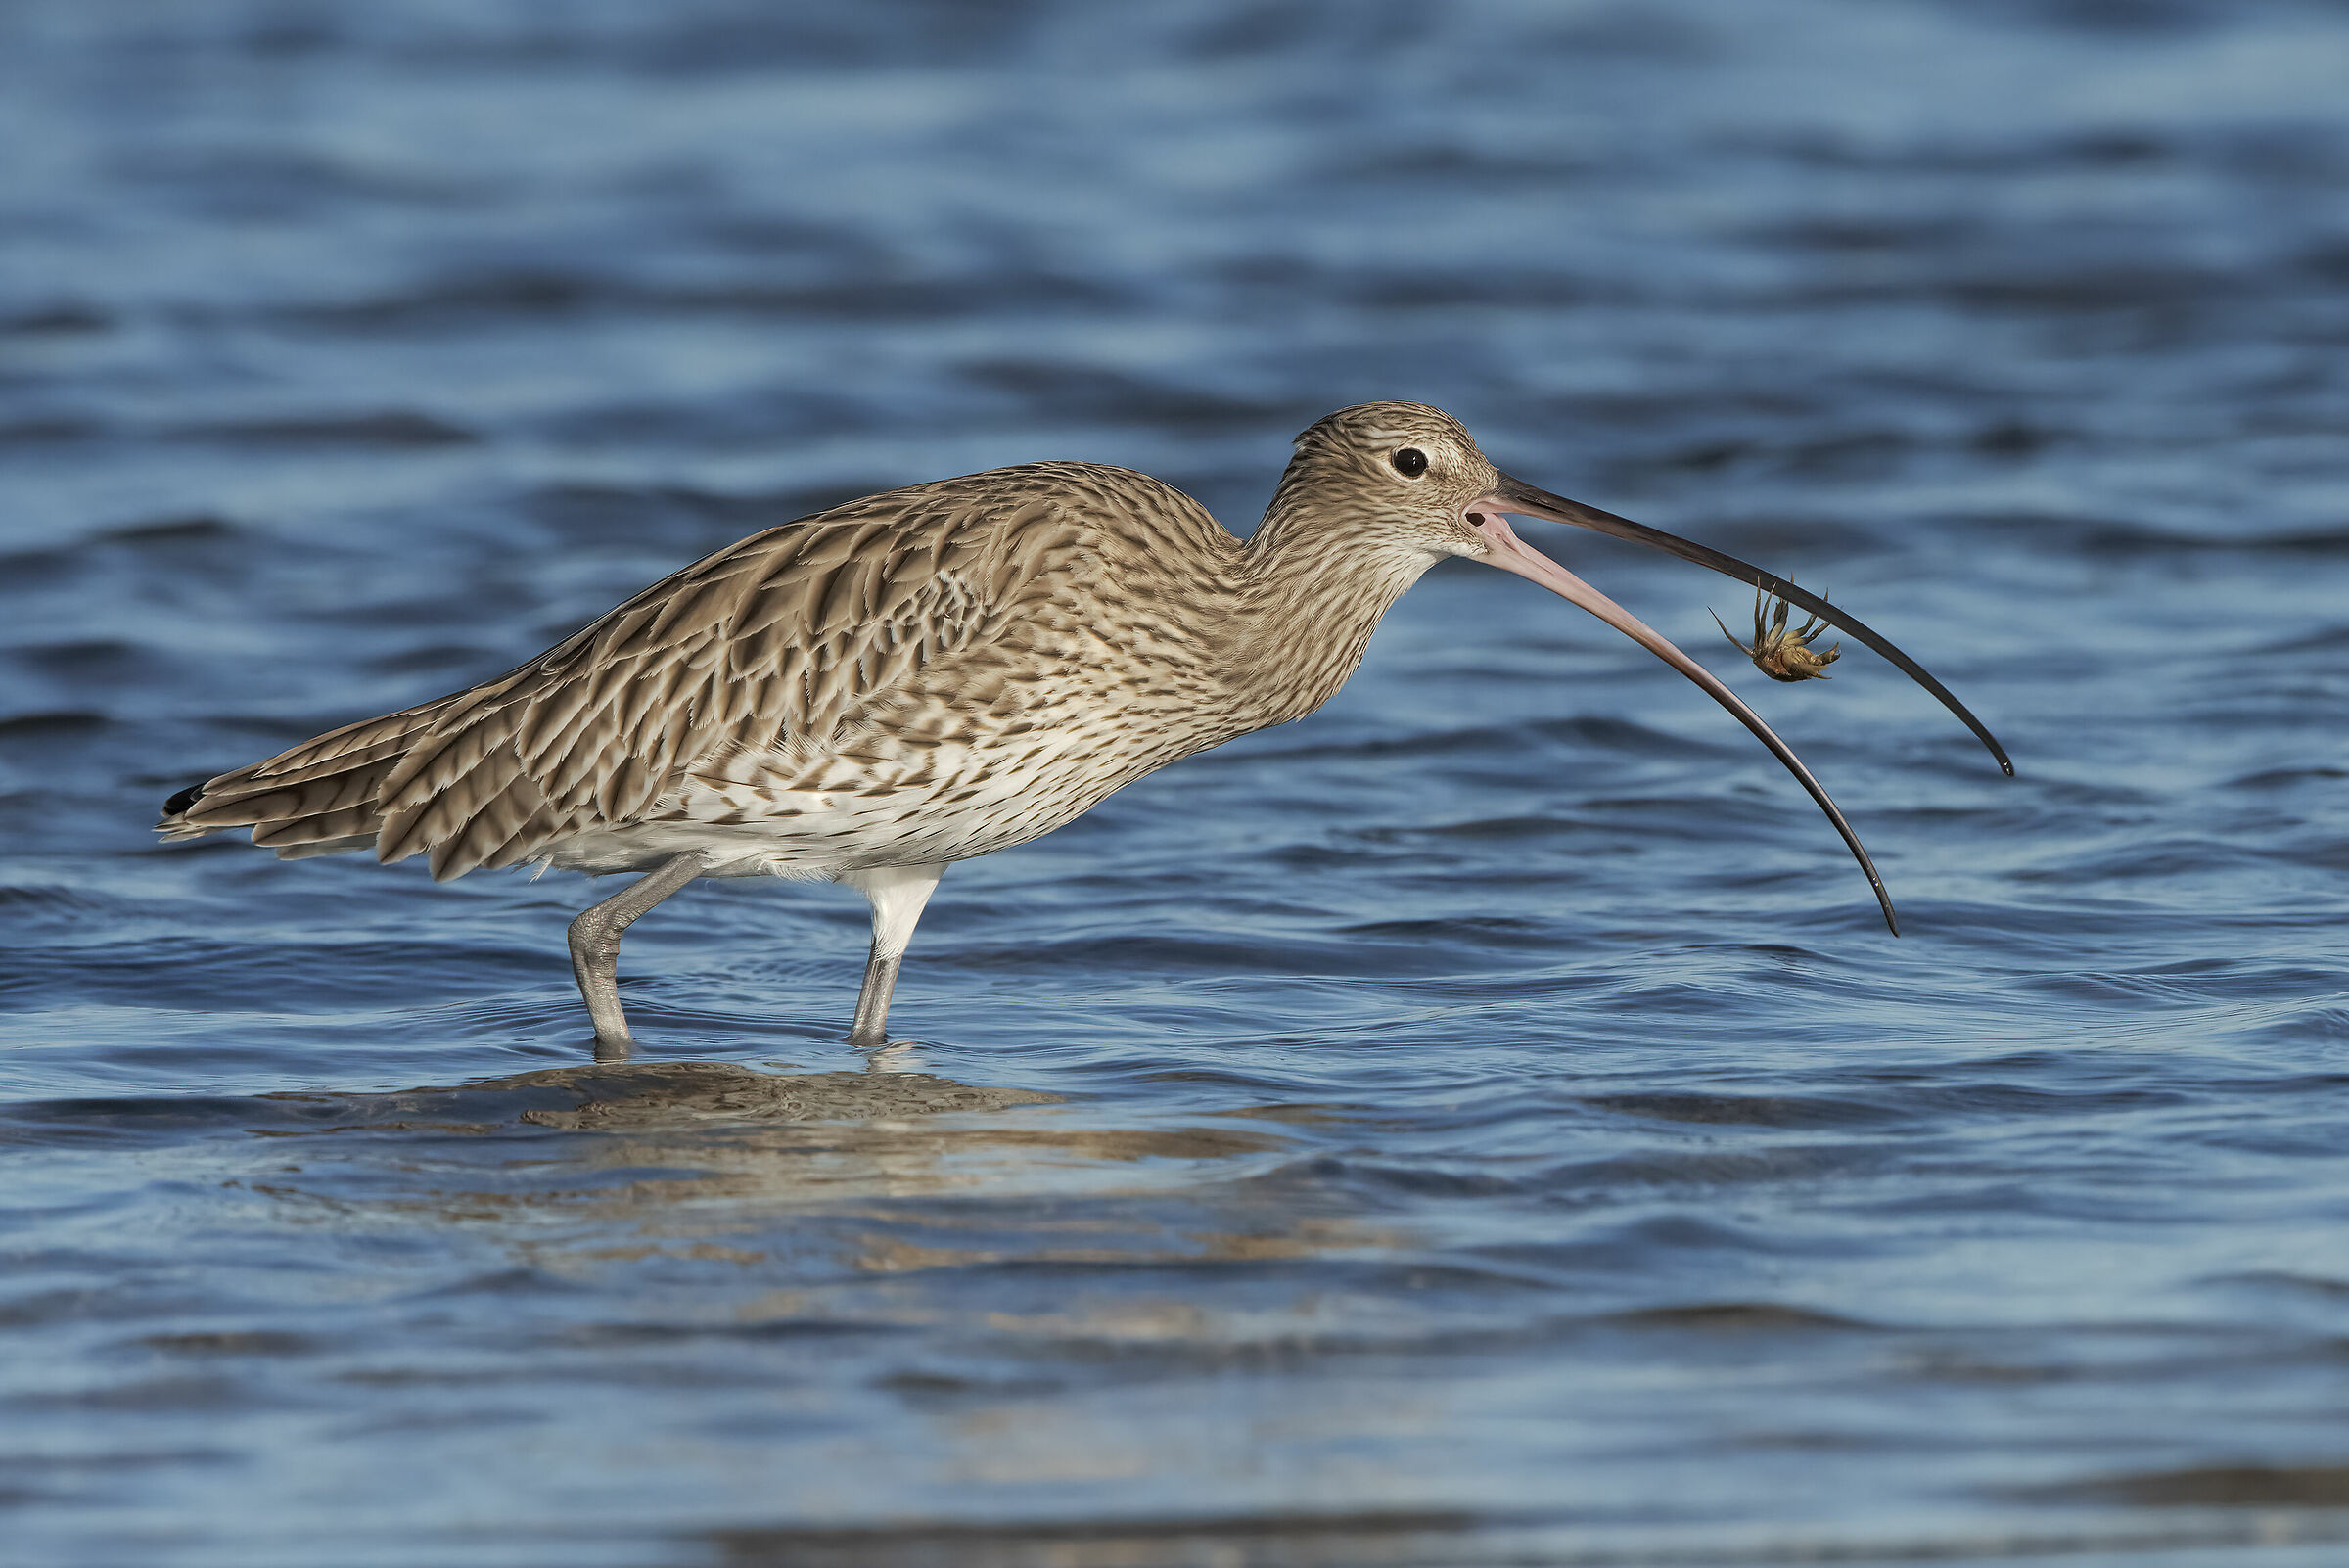 The curlew and the crab ...